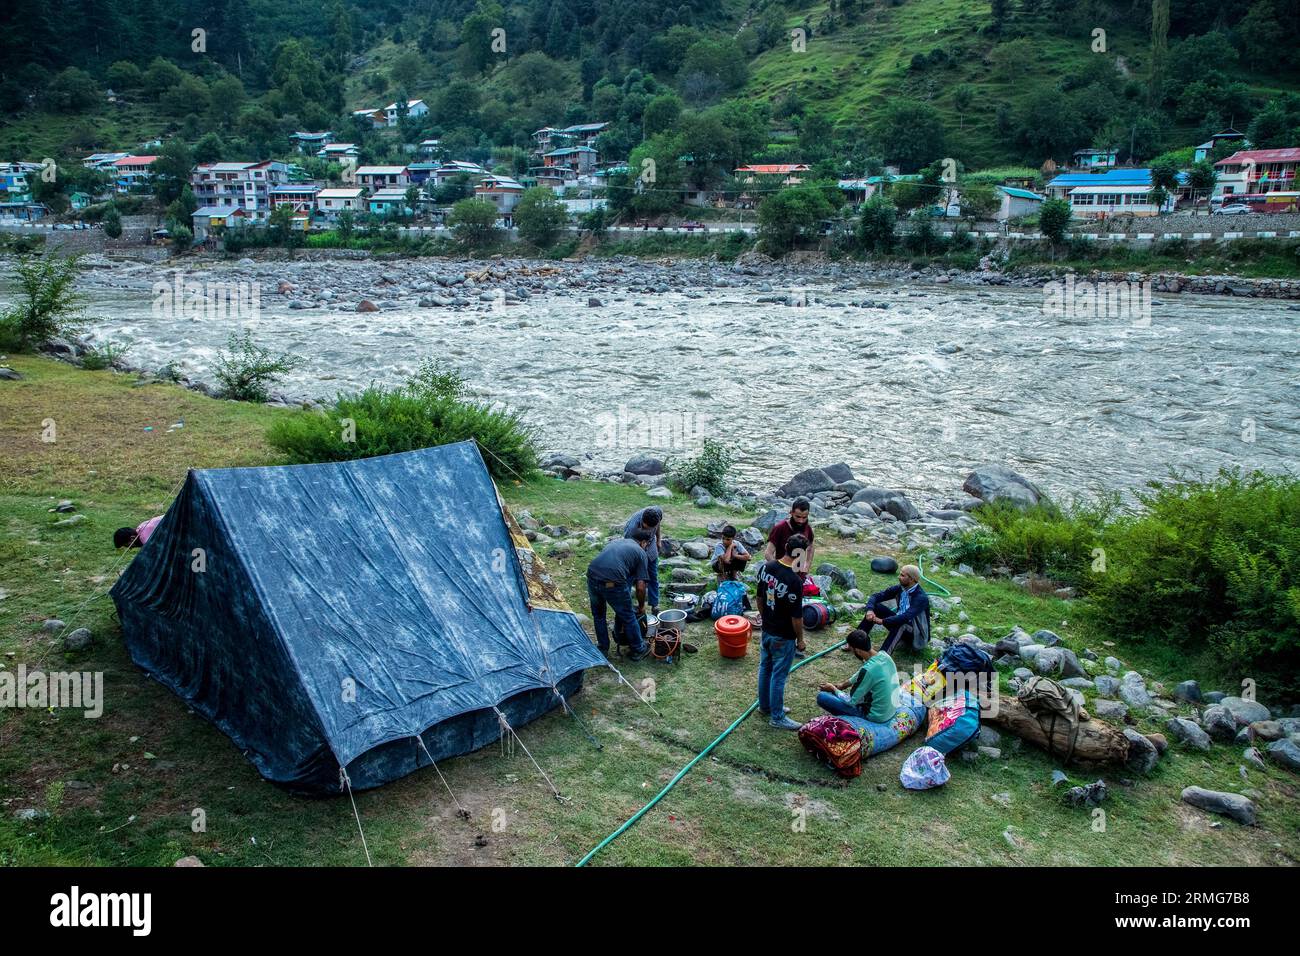 Keran Kupwara, India. 24th Aug, 2023. People are seen camping on the banks of Neelam river or Kishan Ganga that has divided Kashmir into two parts controlled by nuclear rivals India and Pakistan. The river acts as a disputed line of control and flows through a village called Keran from both sides which is located on the northern side of Indian Kashmir's Border district Kupwara some 150kms from Srinagar and 93kms from Muzaffarabad, in the Pakistan side of Kashmir. (Photo by Faisal Bashir/SOPA Images/Sipa USA) Credit: Sipa USA/Alamy Live News Stock Photo